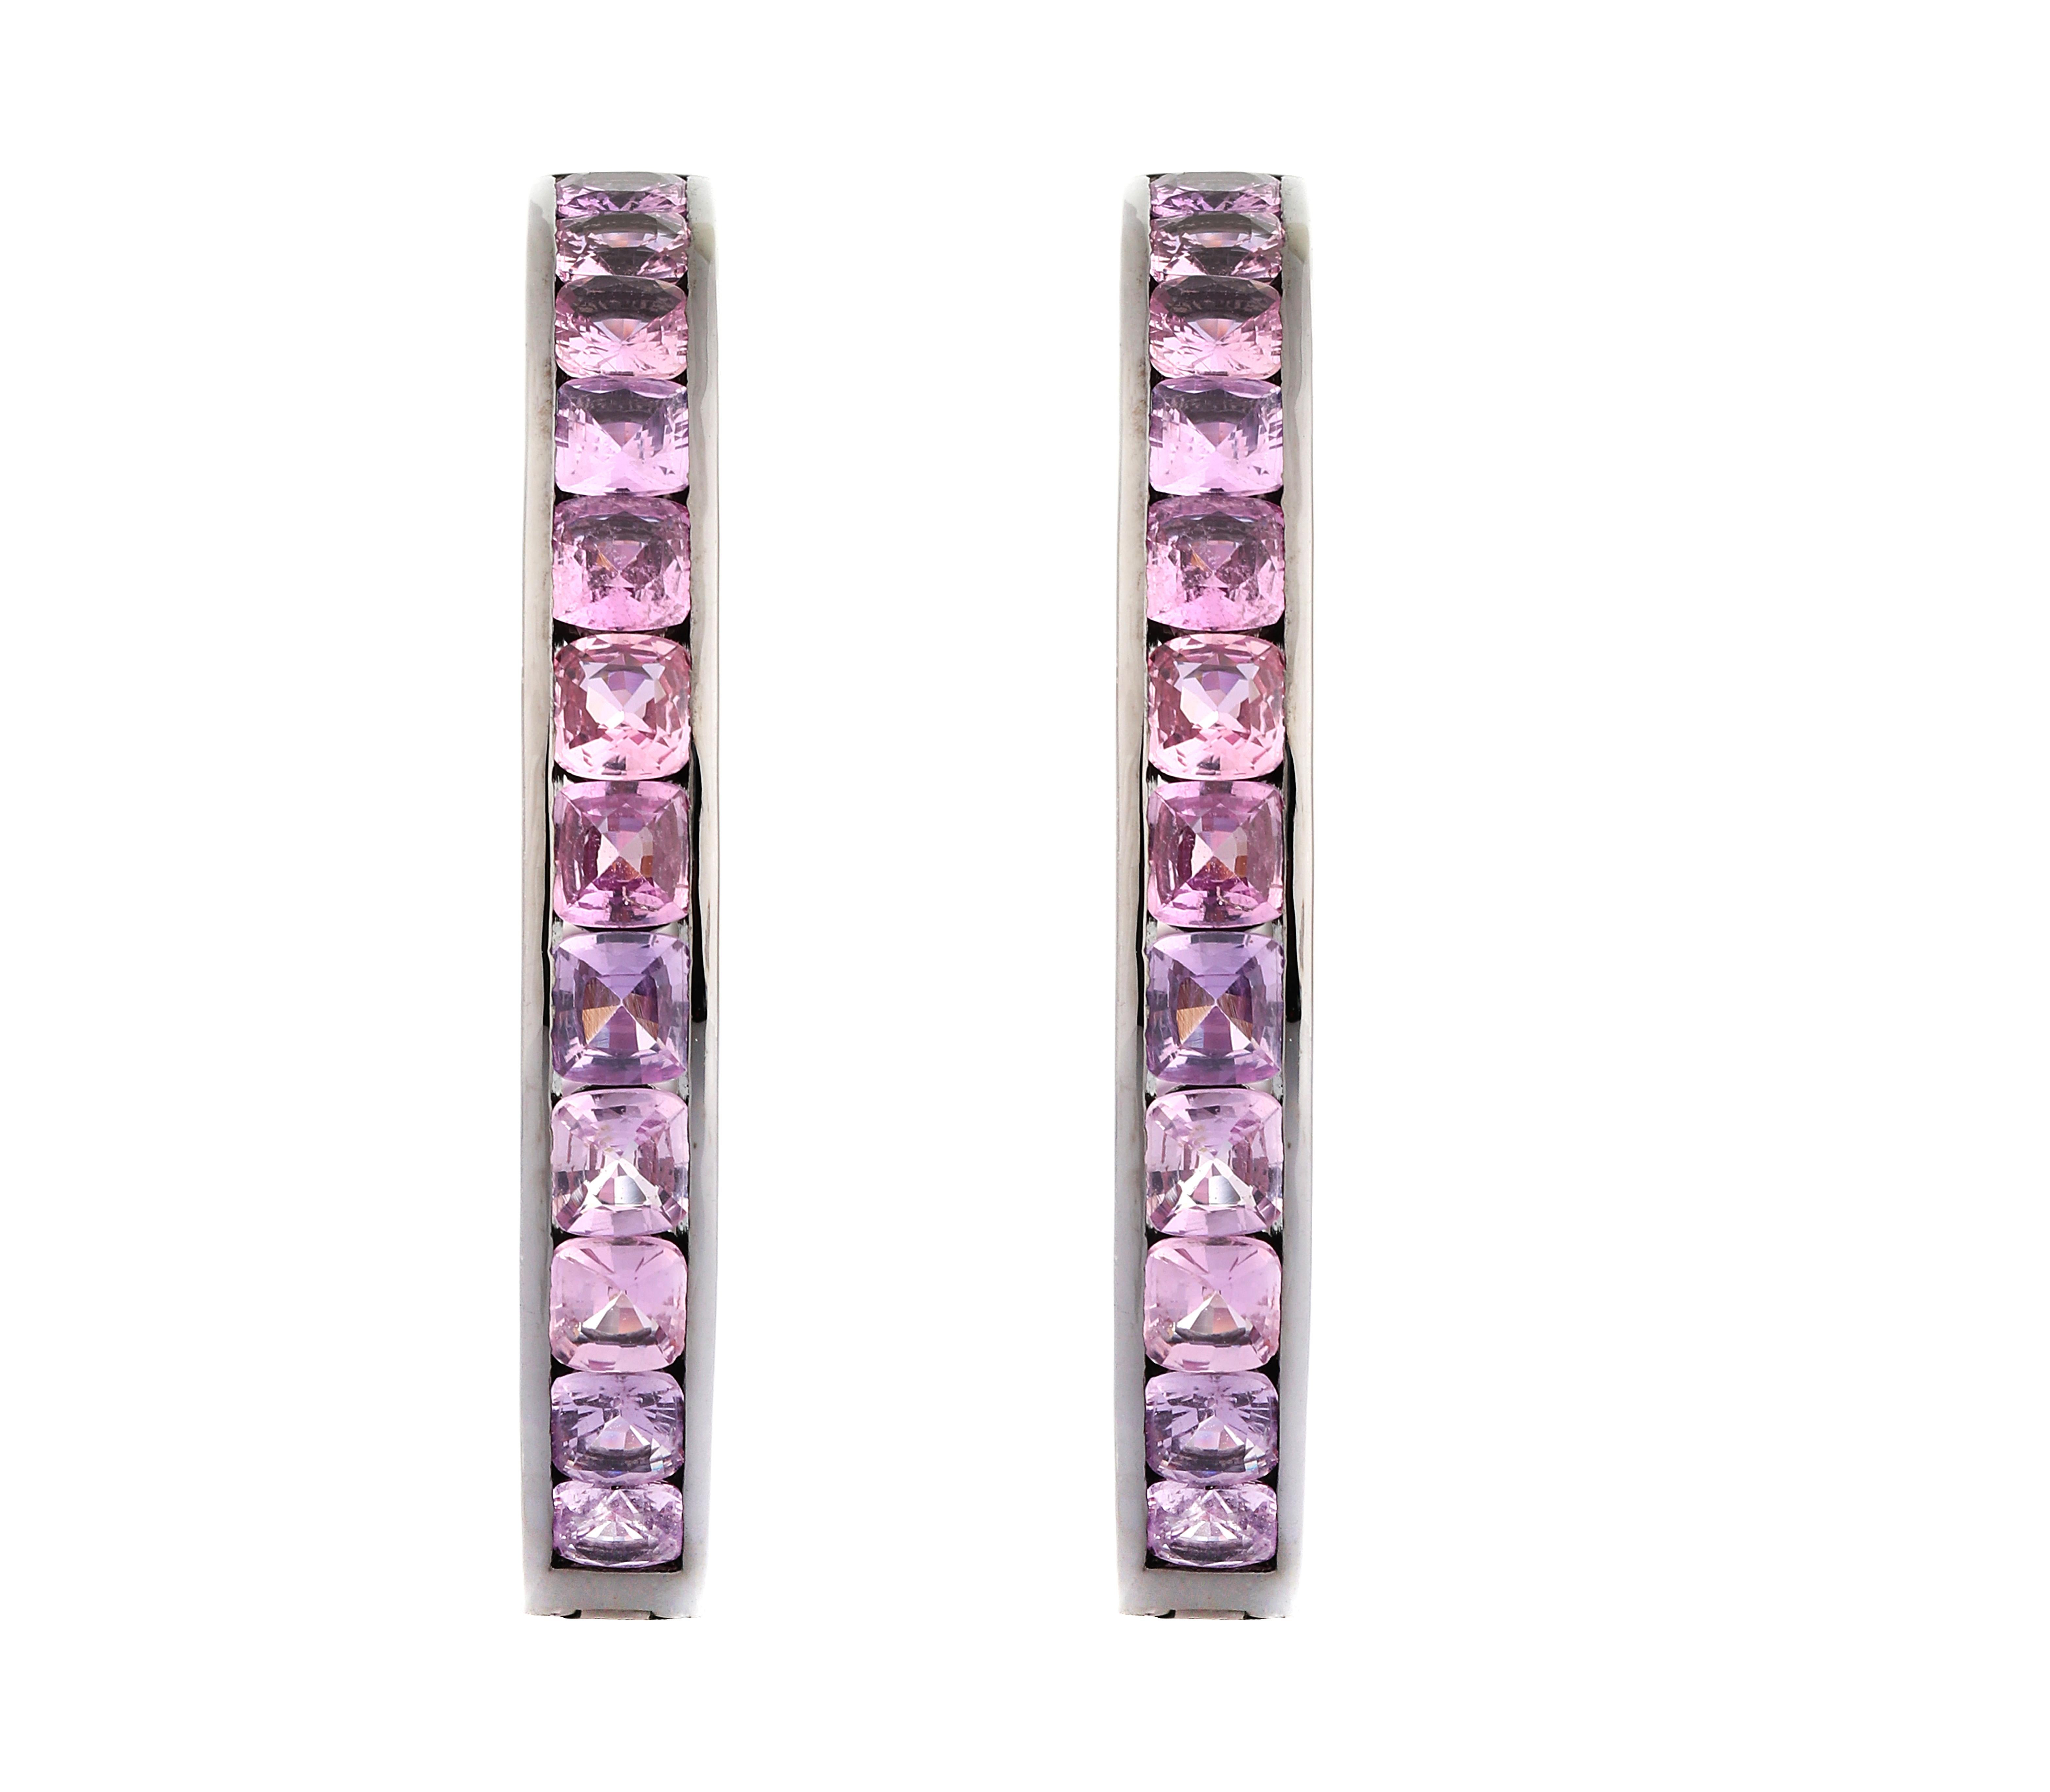 14.28 Carats Pink Sapphire Hoop Earrings in Art-Deco Style

You are like the wind. You should await for nobody. You are fearless. You are free. You should shine in all your splendors and you should charm in all your glory. You should always head